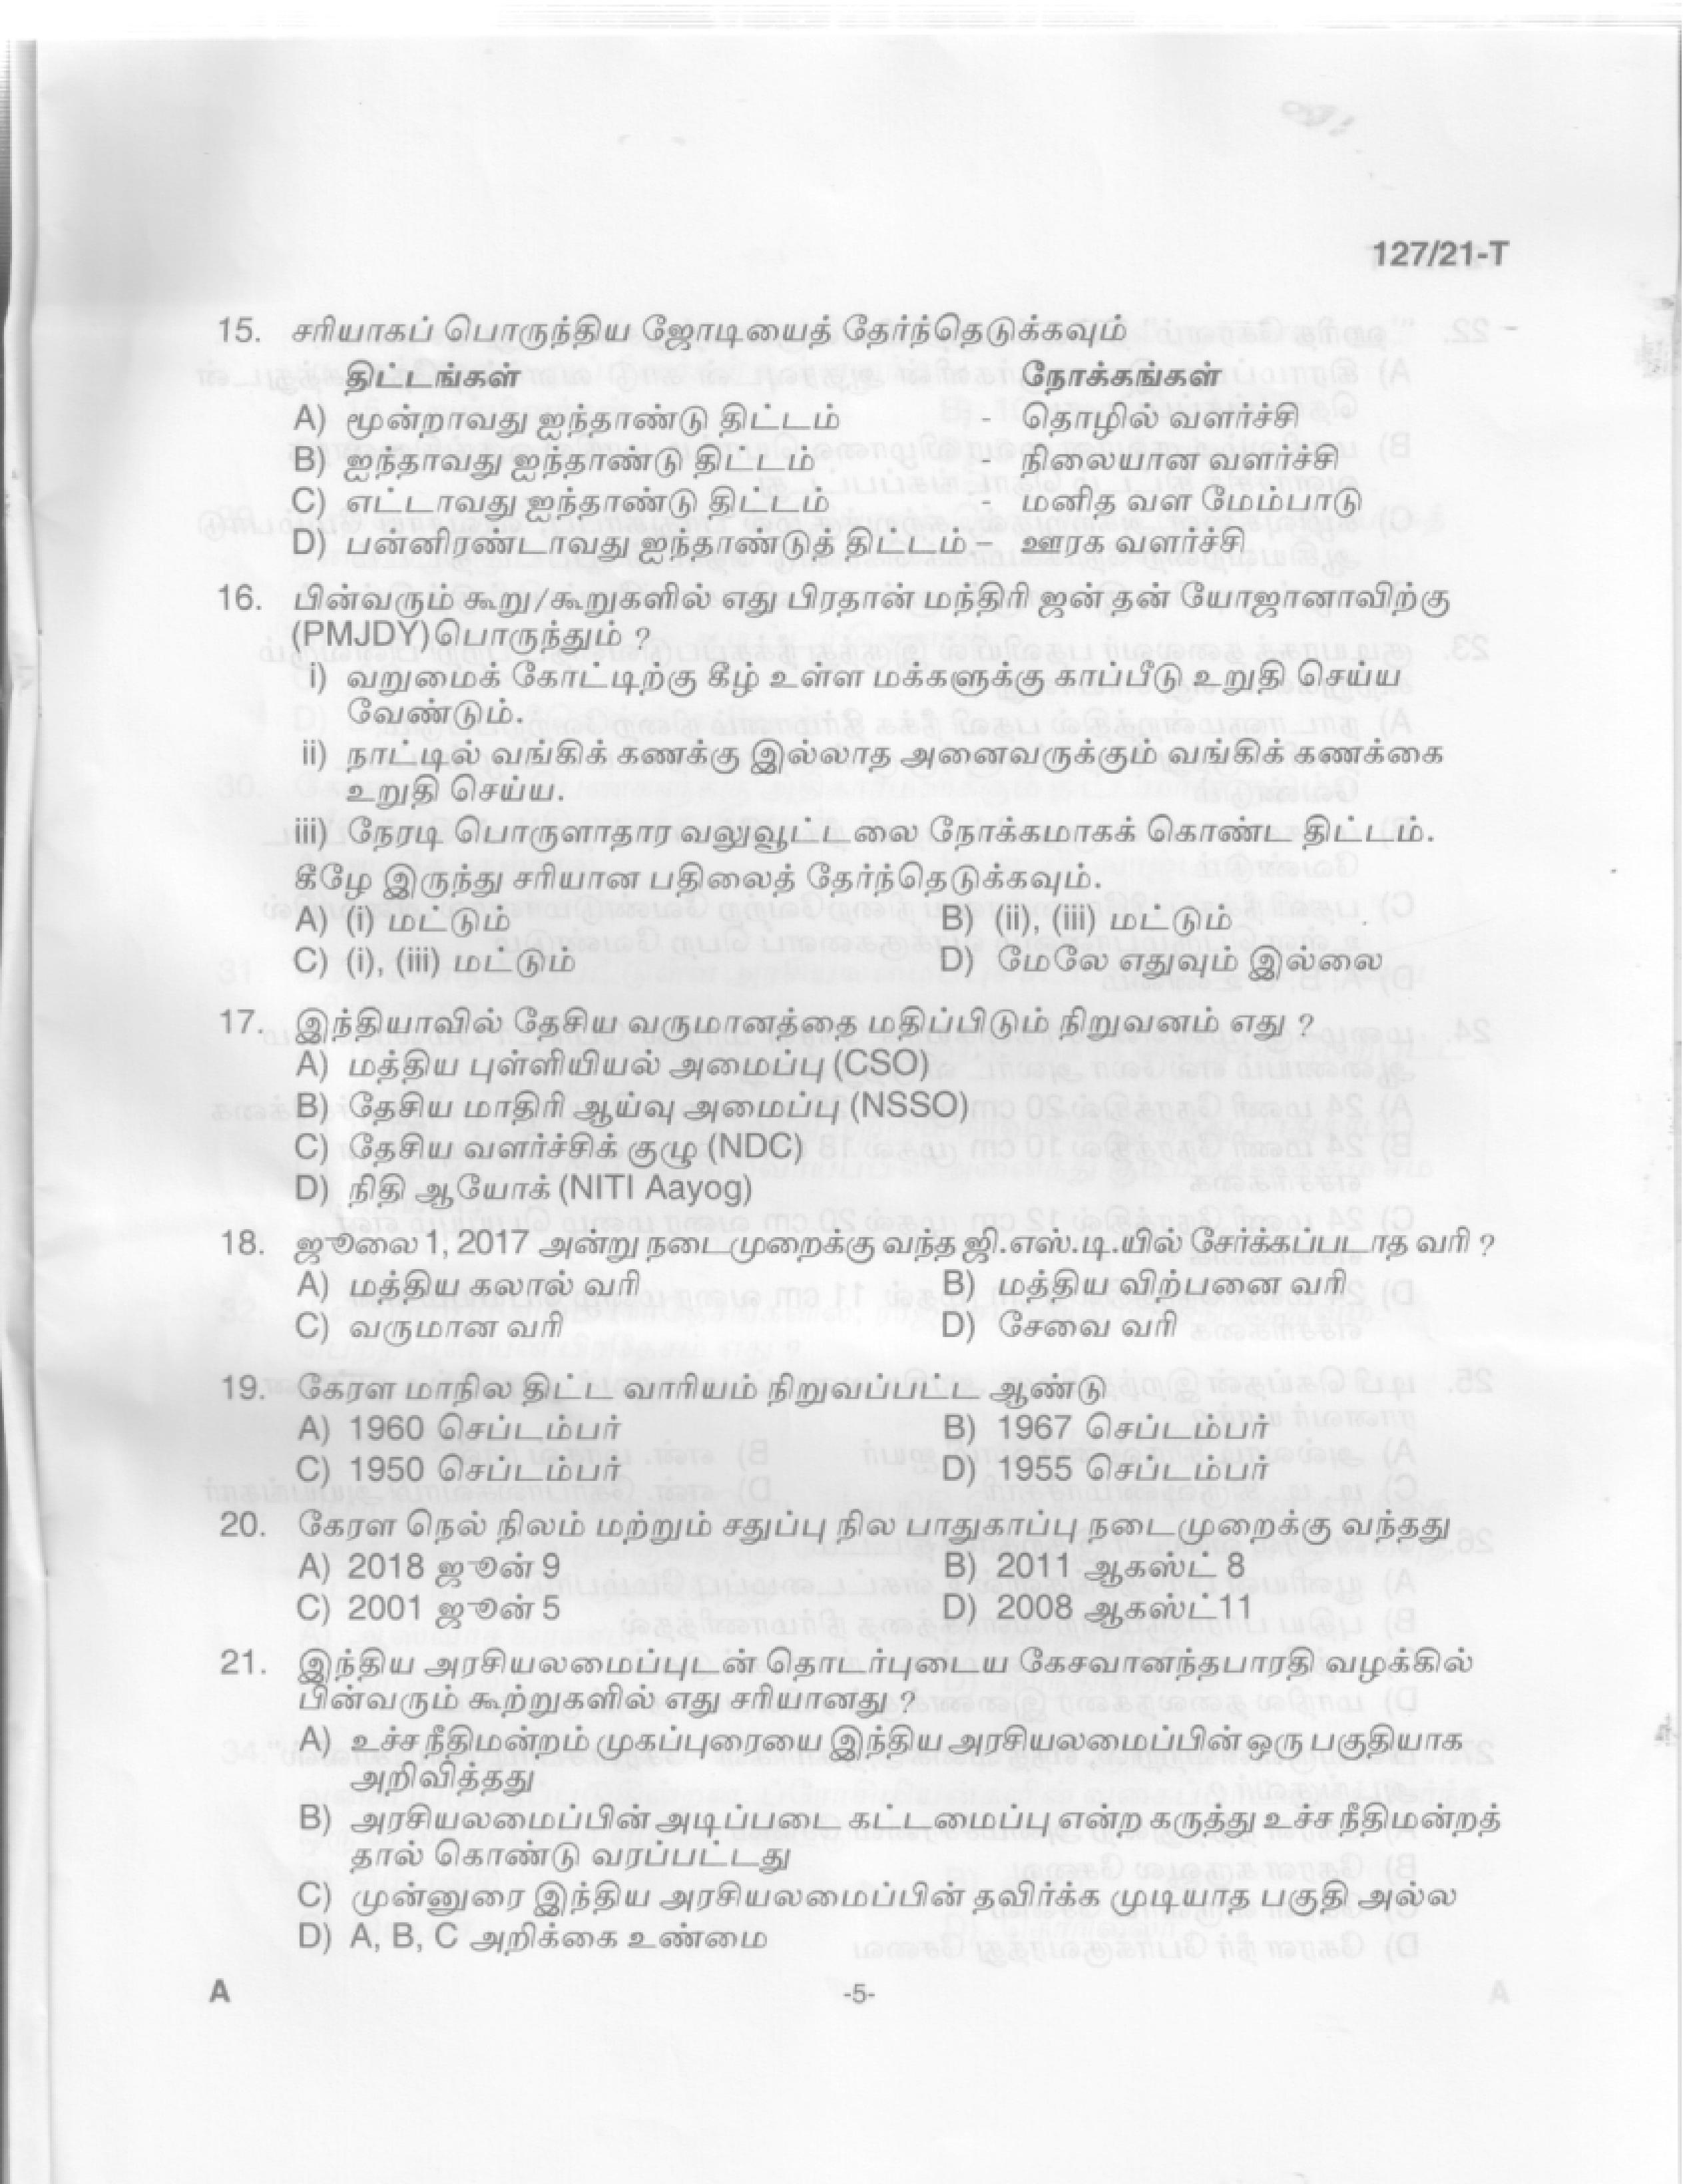 Office Attendant and Laboratory Attender Tamil Exam 2021 Code 1272021 3